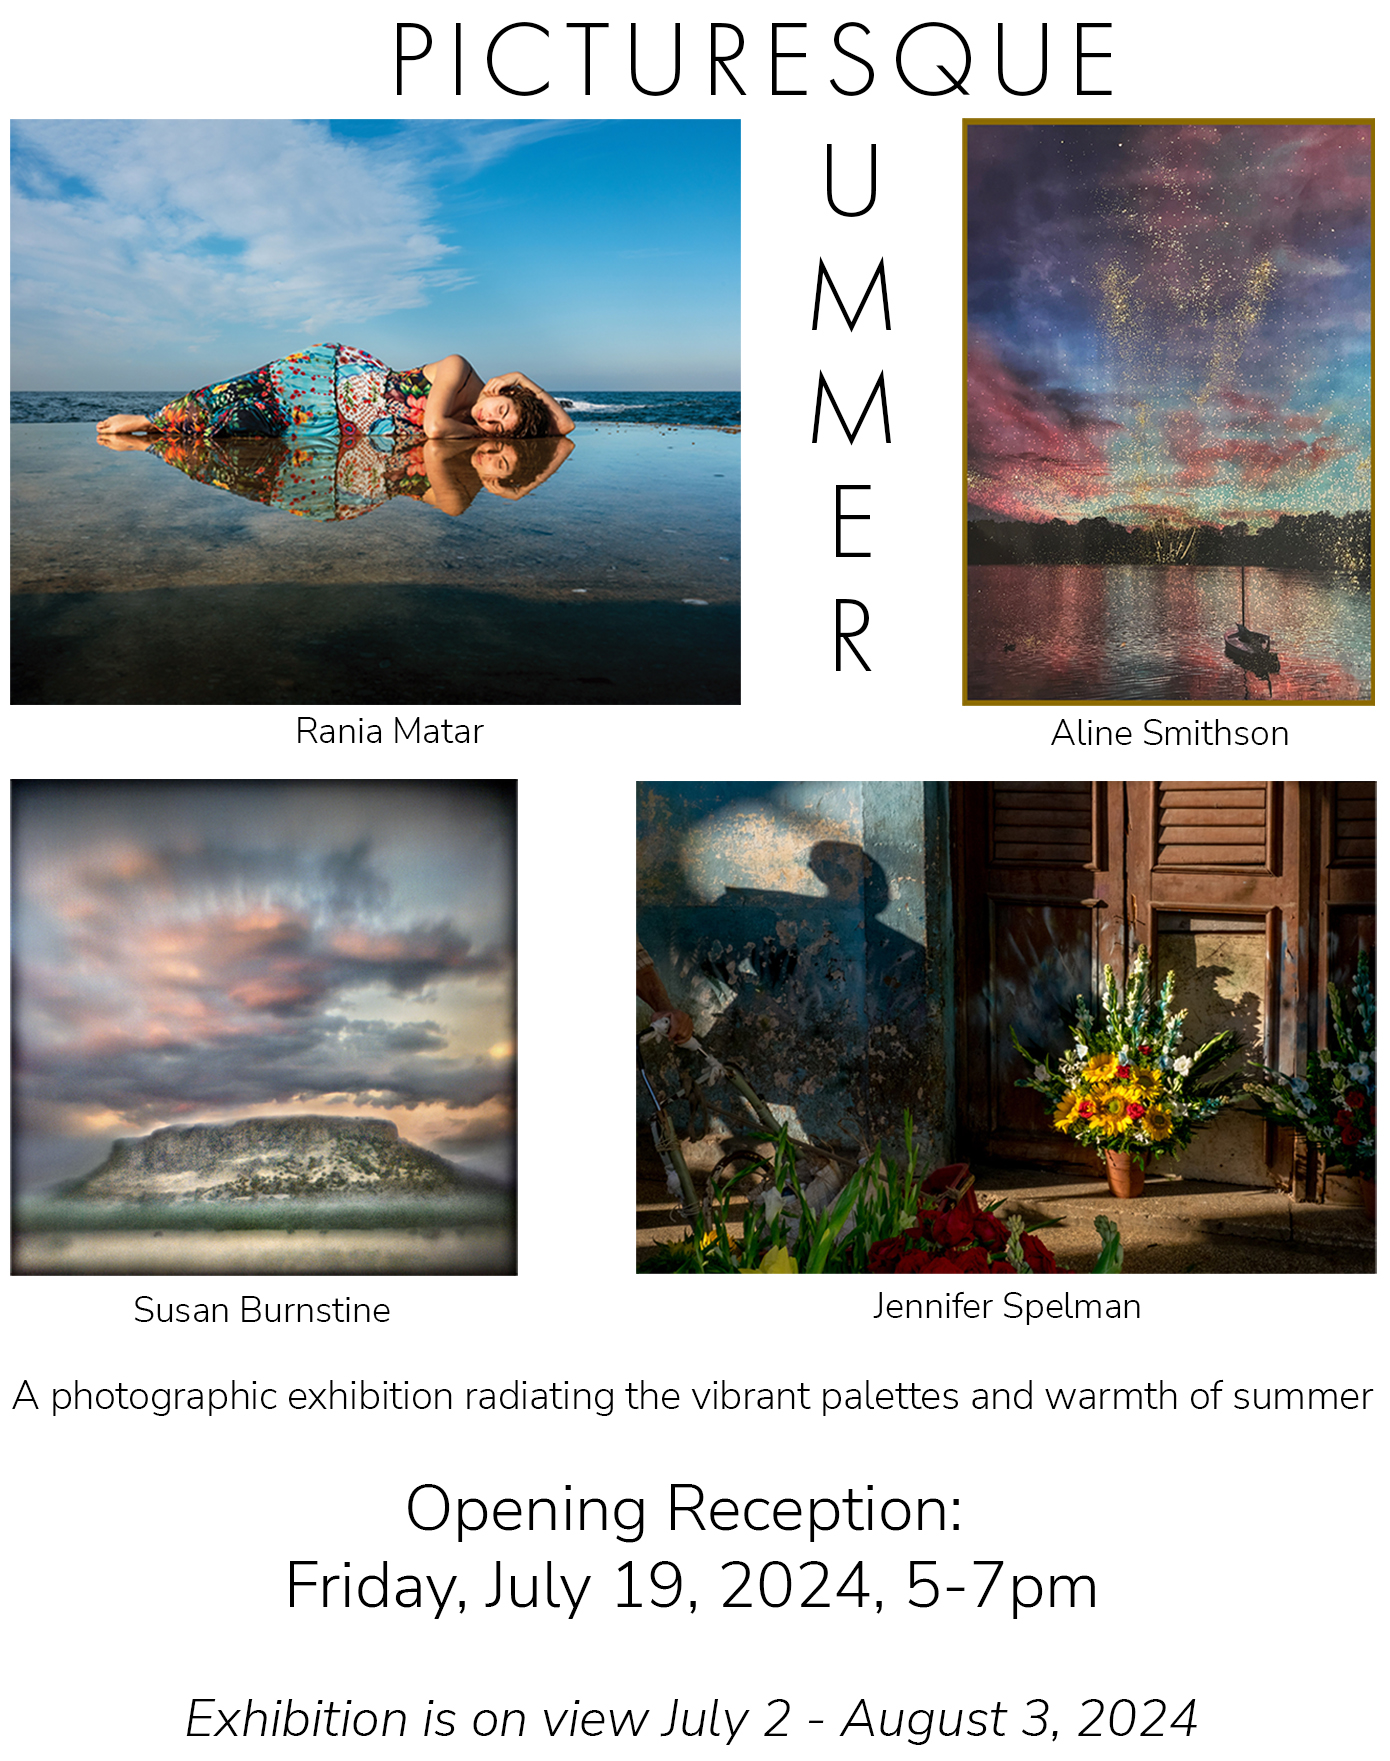 Picturesque Summer group exhibition, Picturesque Summer, radiating the vibrant palettes and warmth of summer through the photography of four female photographers. Opening reception July 19, 5-7pm